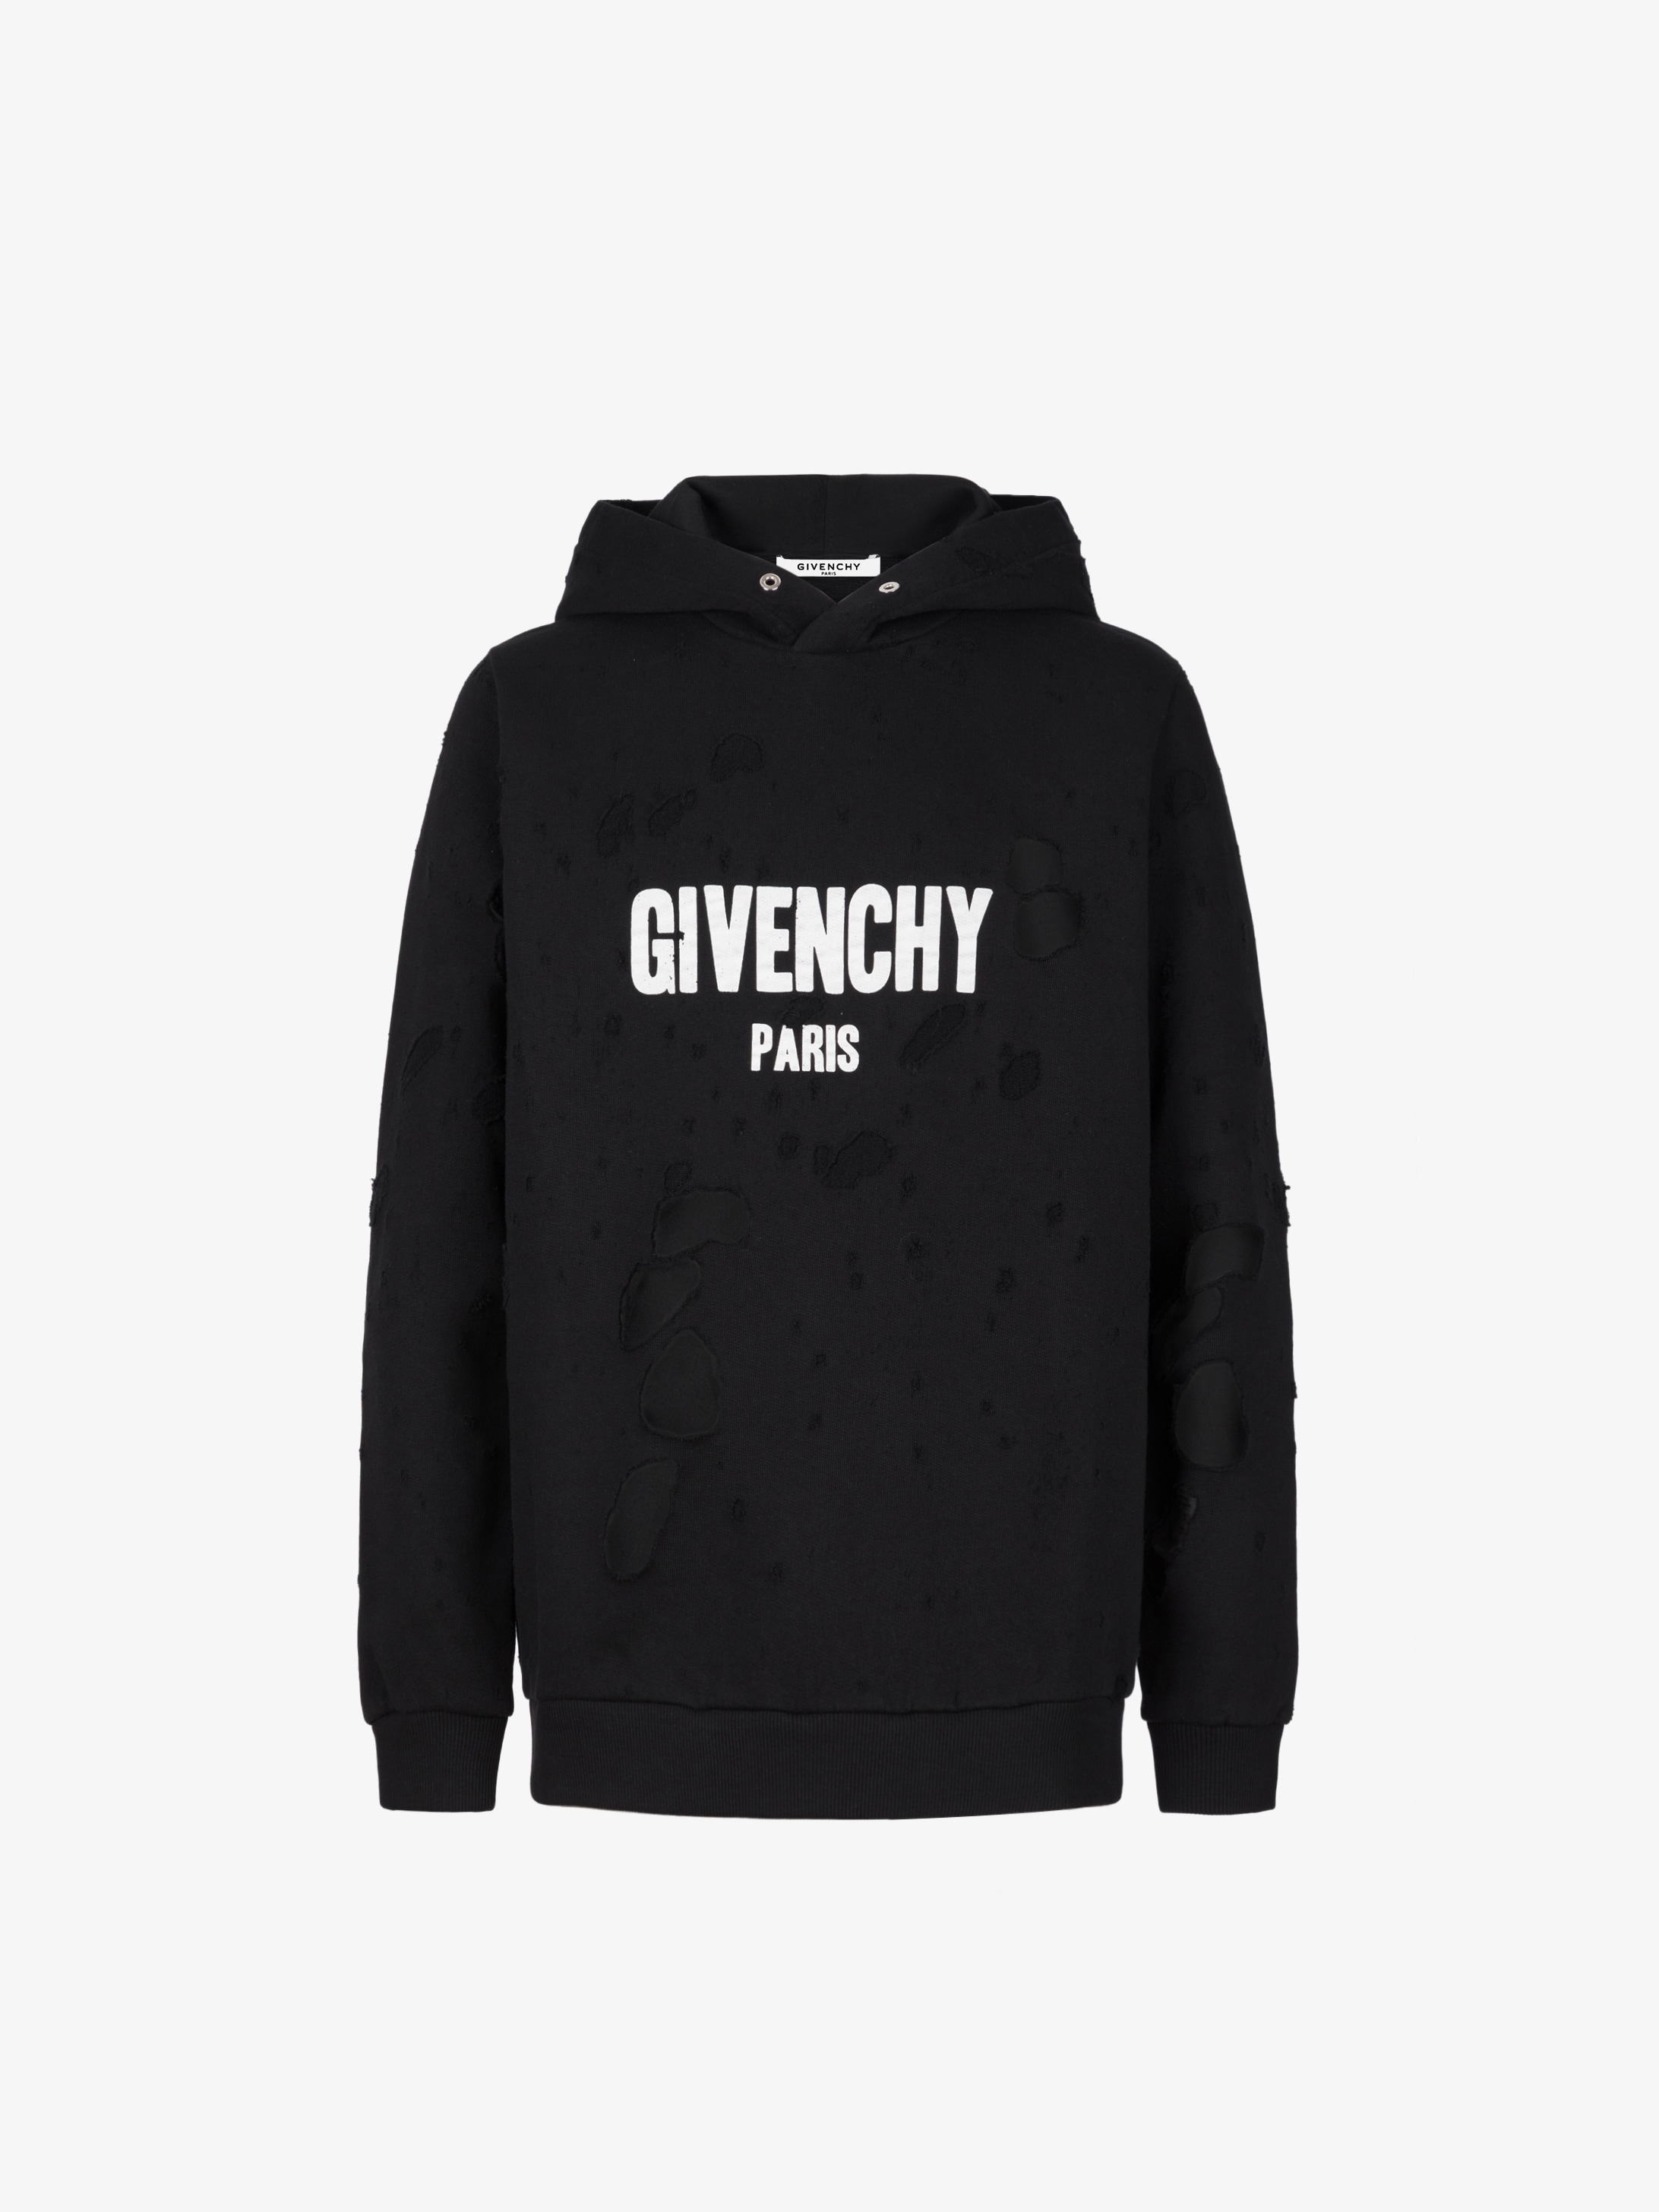 Givenchy PARIS destroyed hoodie | GIVENCHY Paris